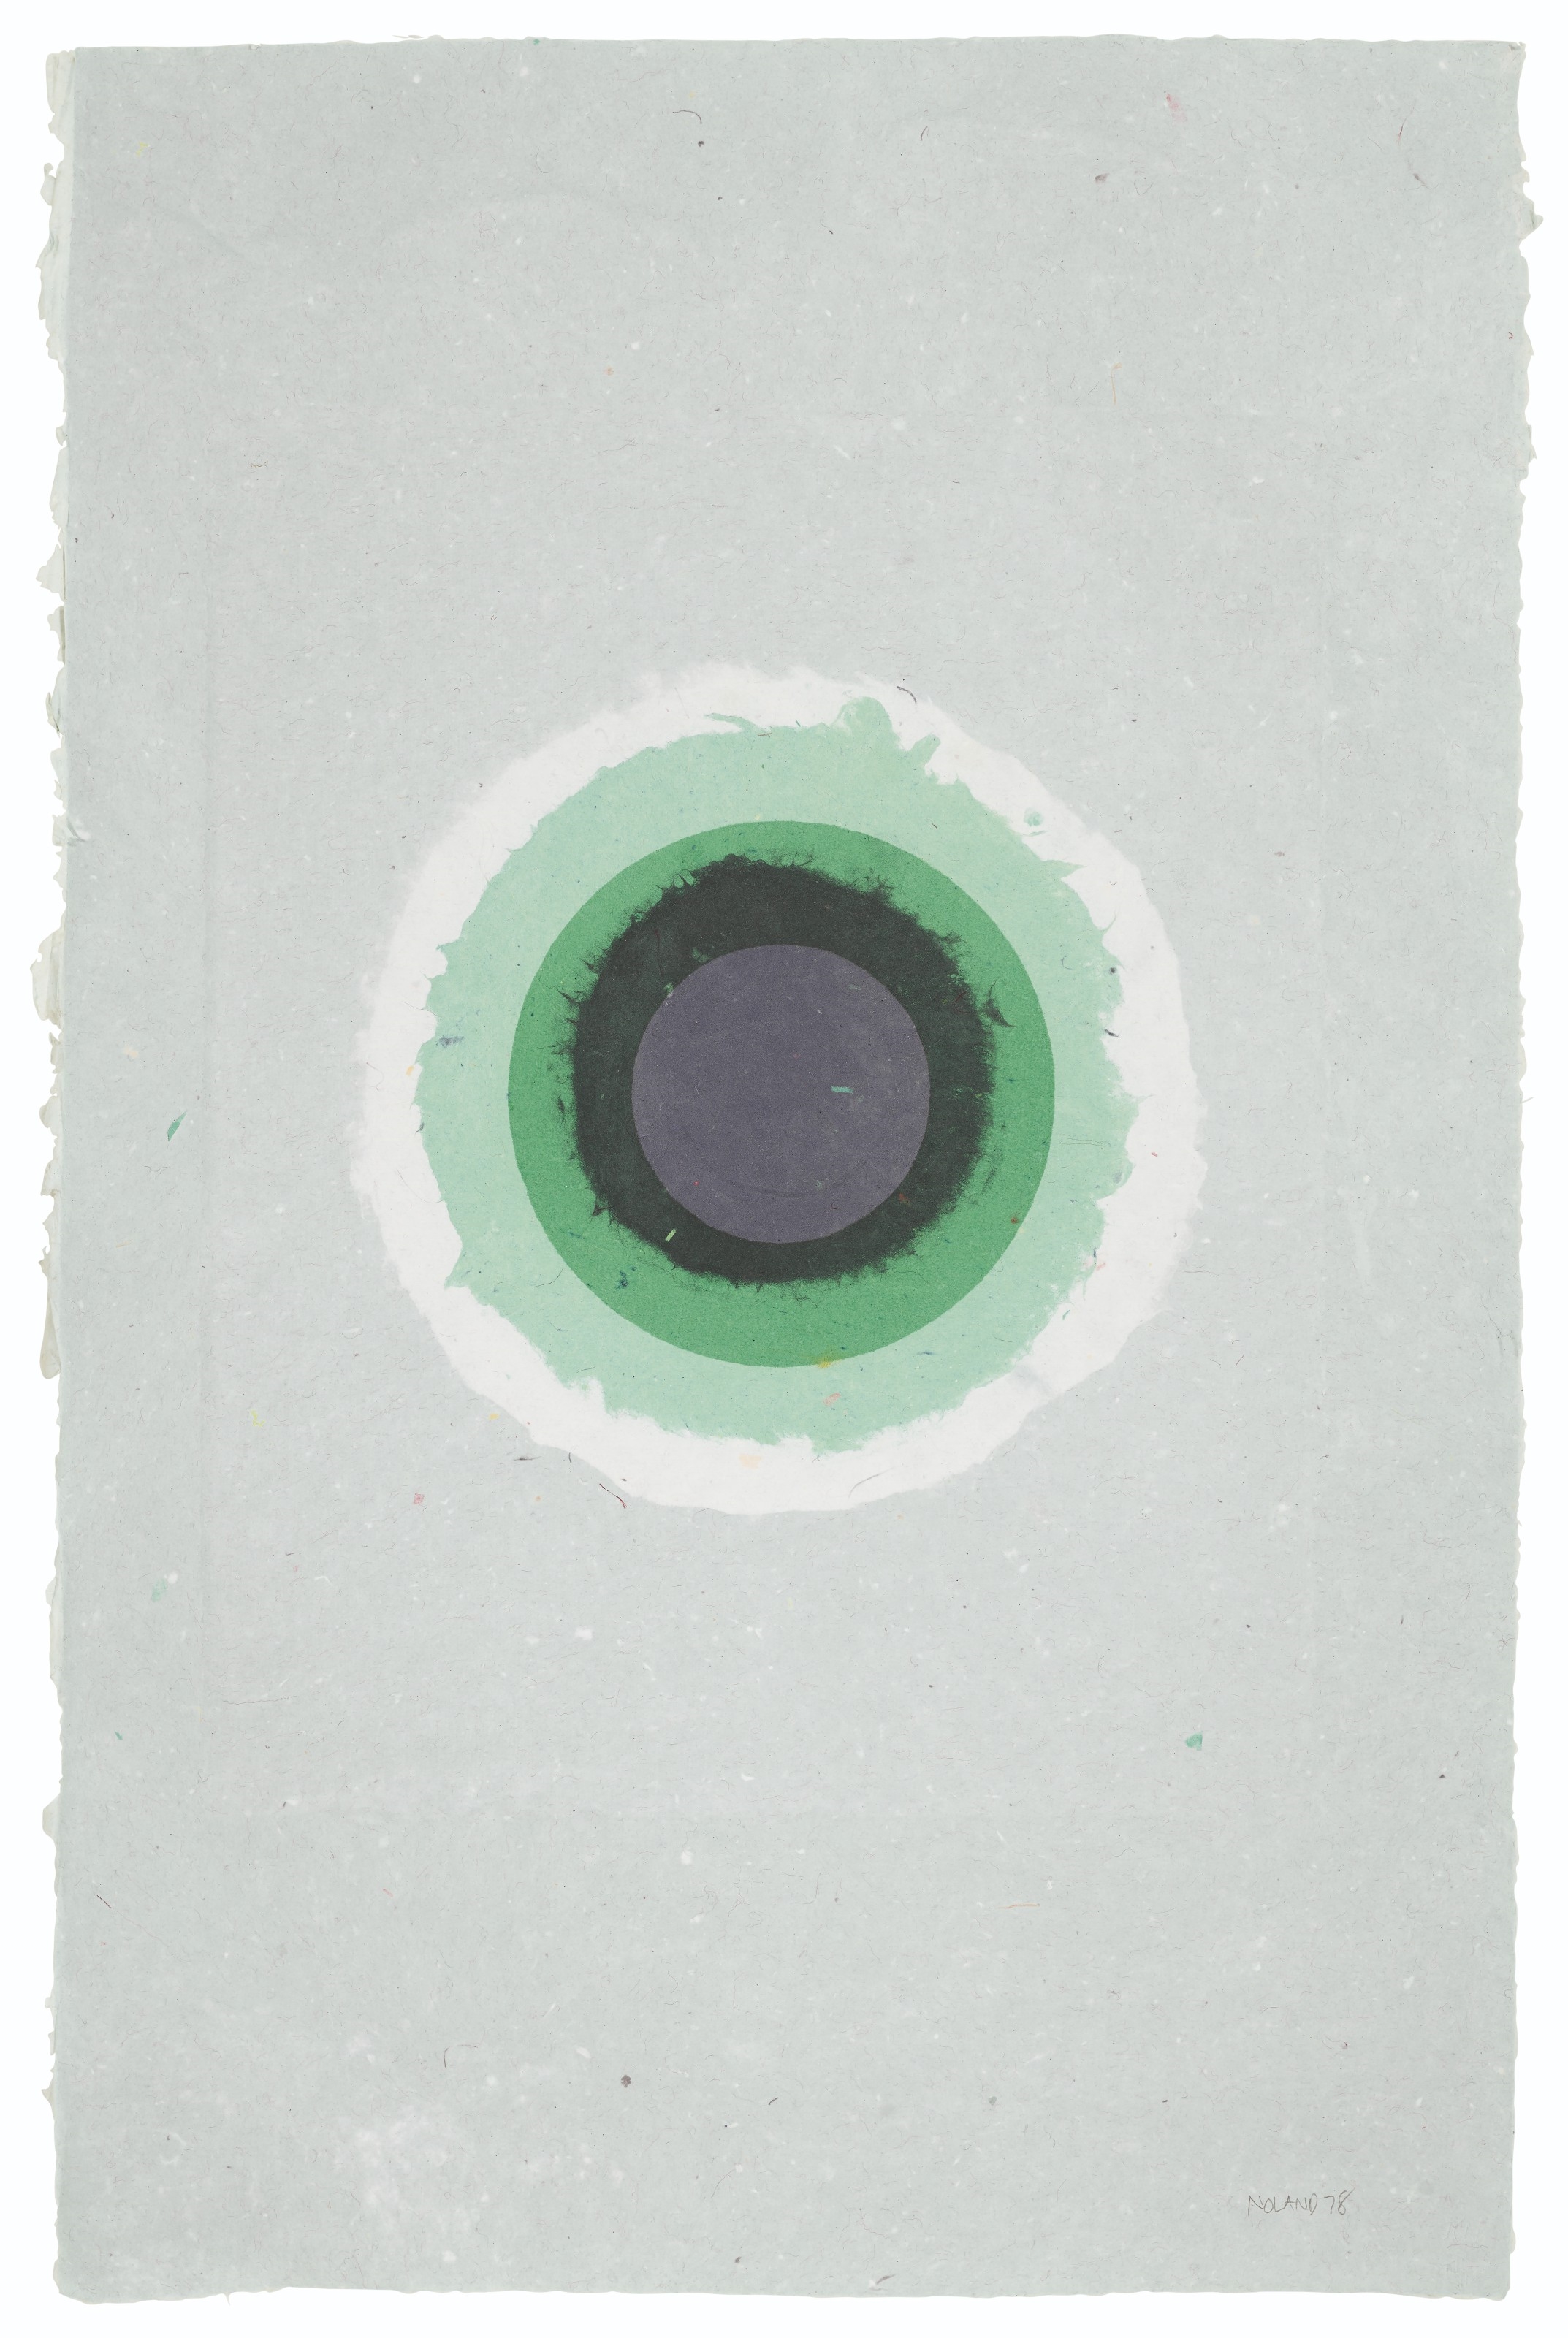 Circle II-5, from Handmade Paper Project by Kenneth Noland, 1978